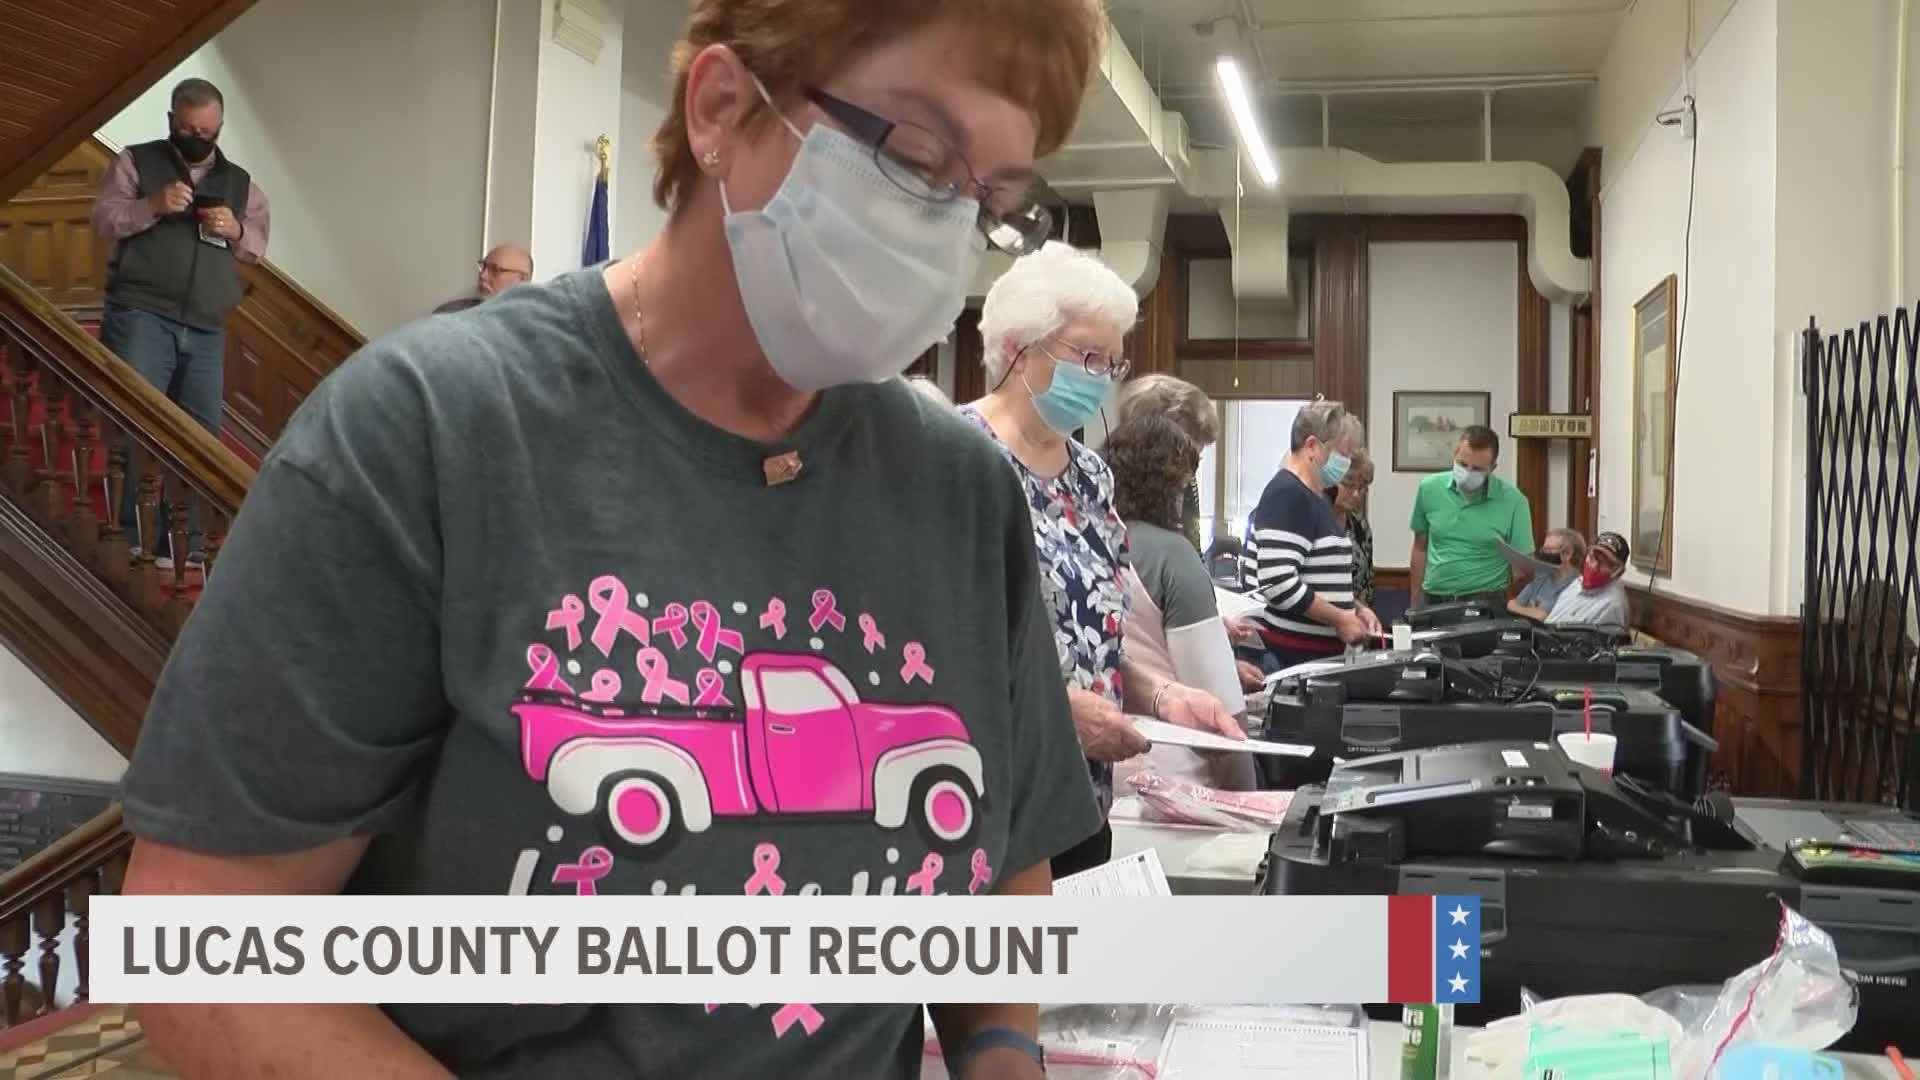 Lucas County joins Jasper County in a county-wide recount and audit after an error was found in election night results.